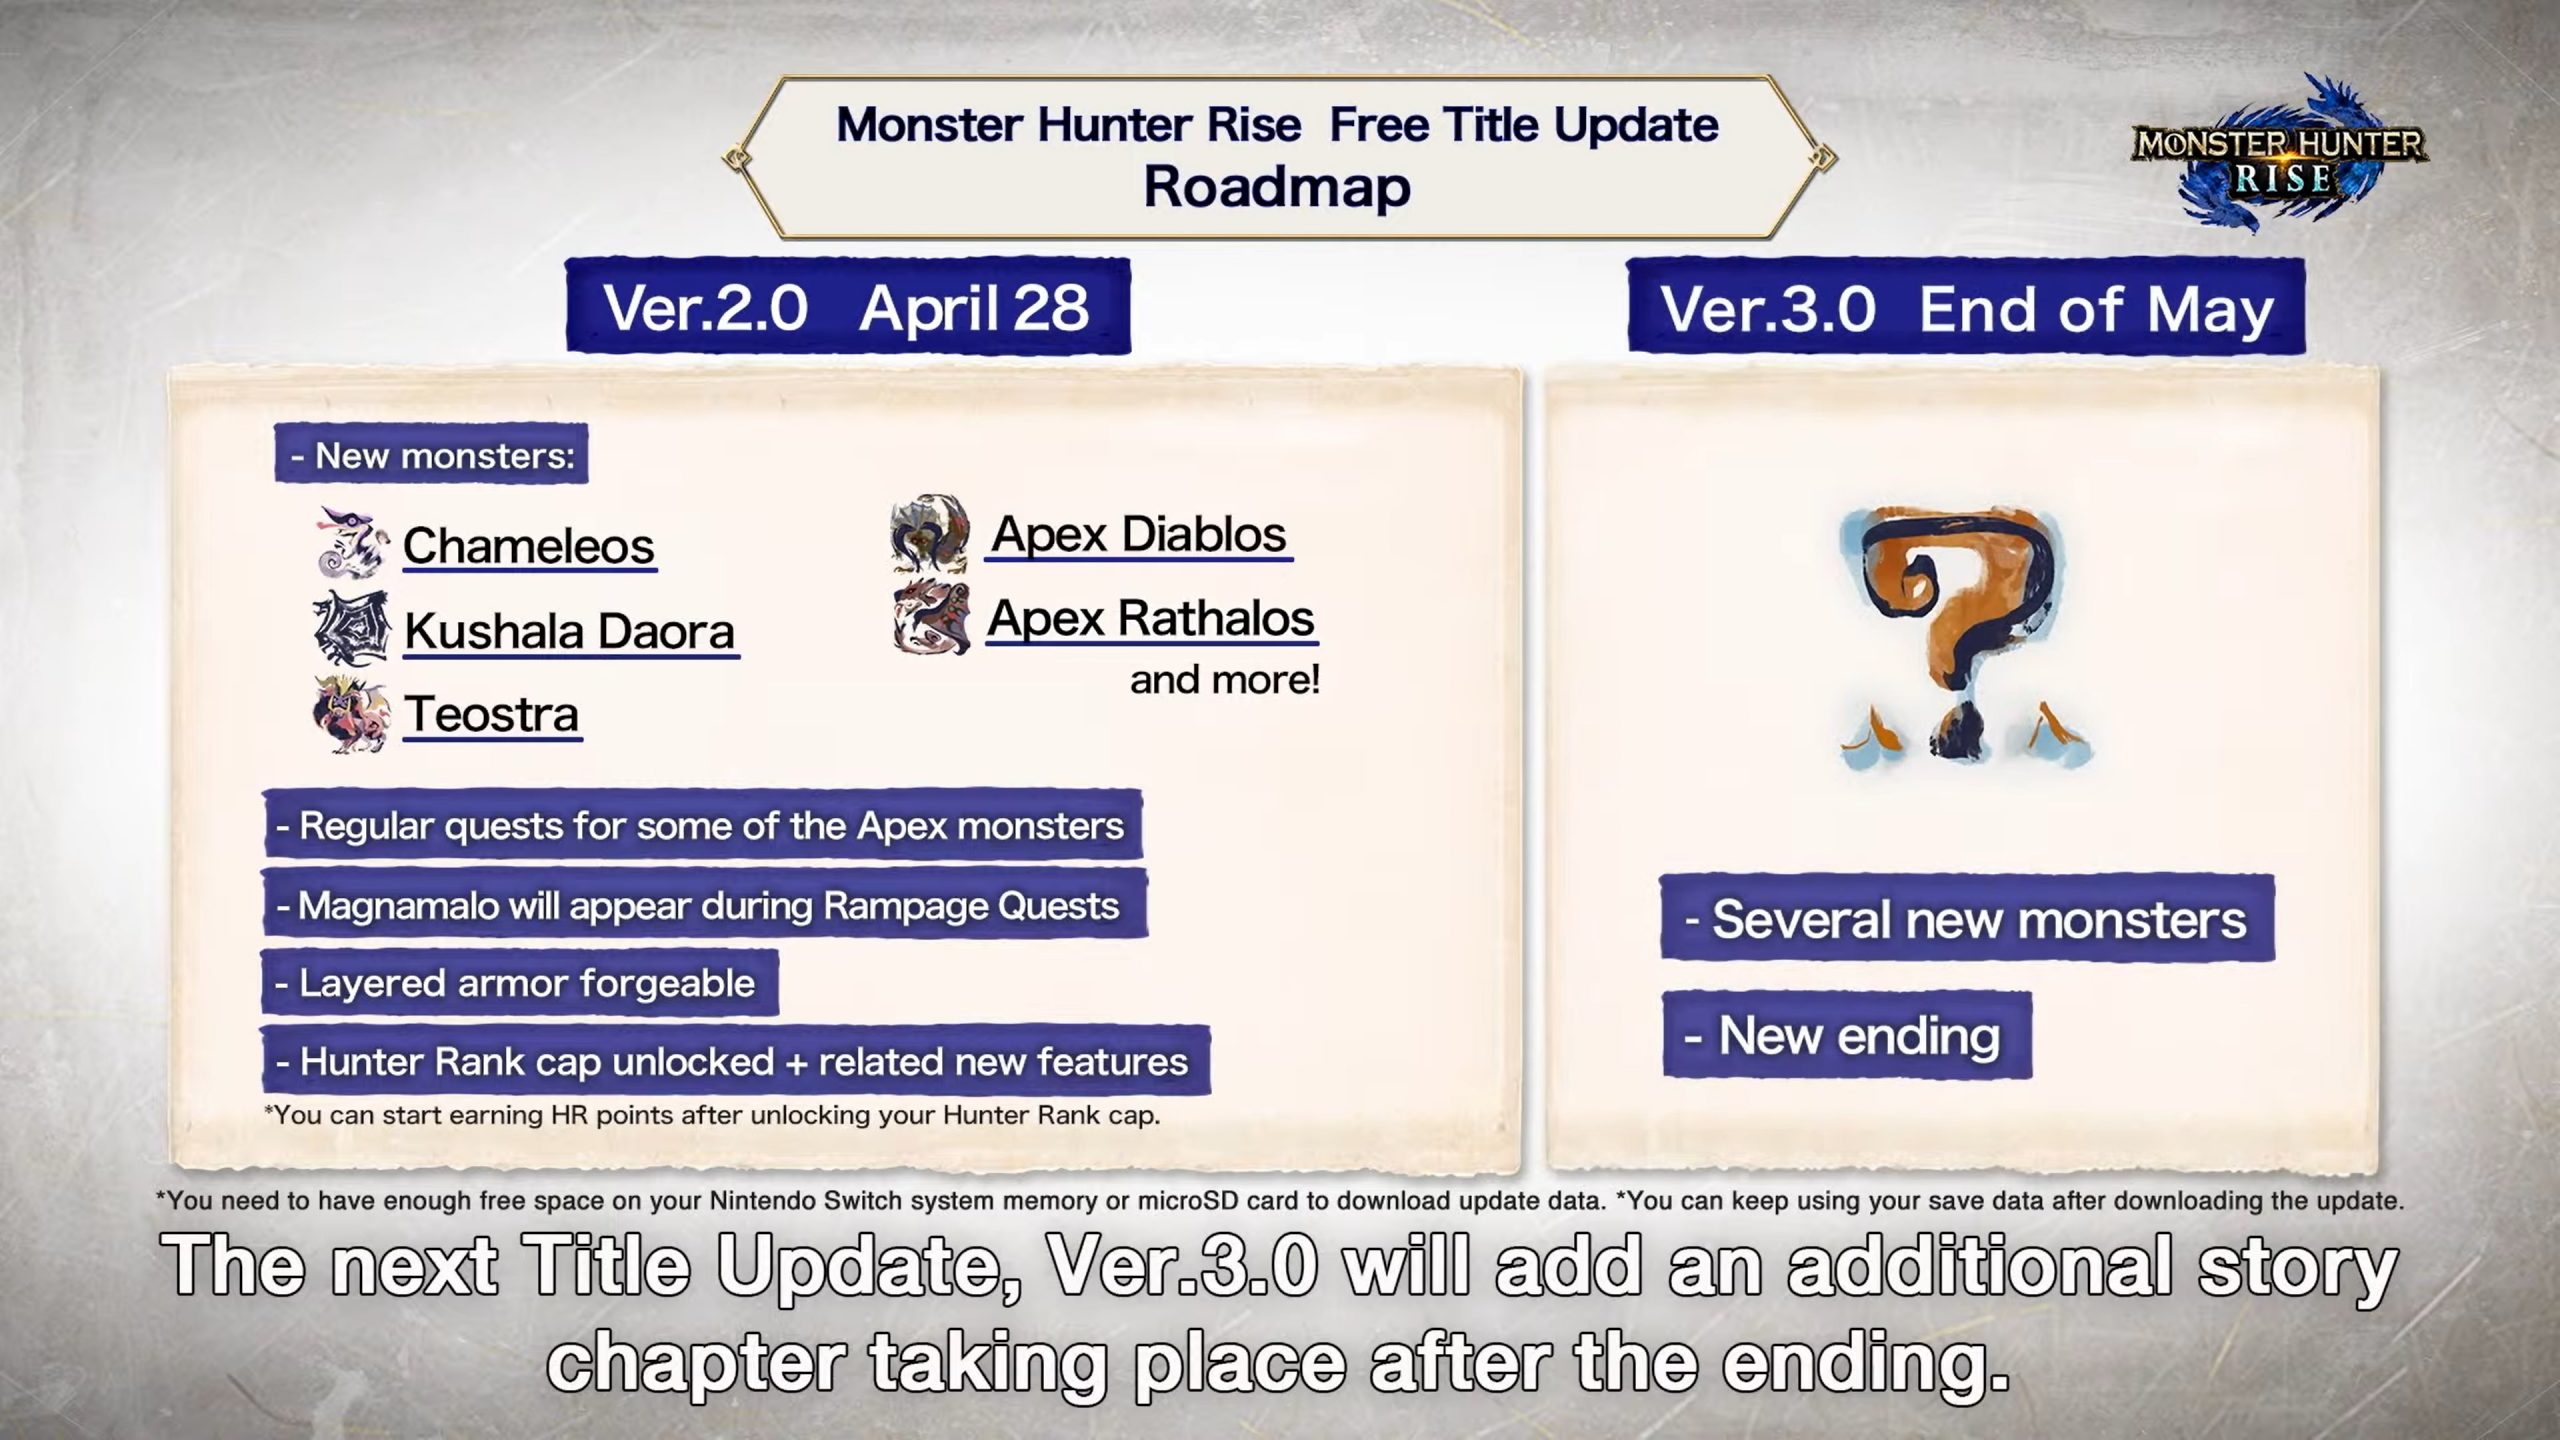 Monster Hunter Rise Sunbreak Title Update 2 adds 3 monsters and